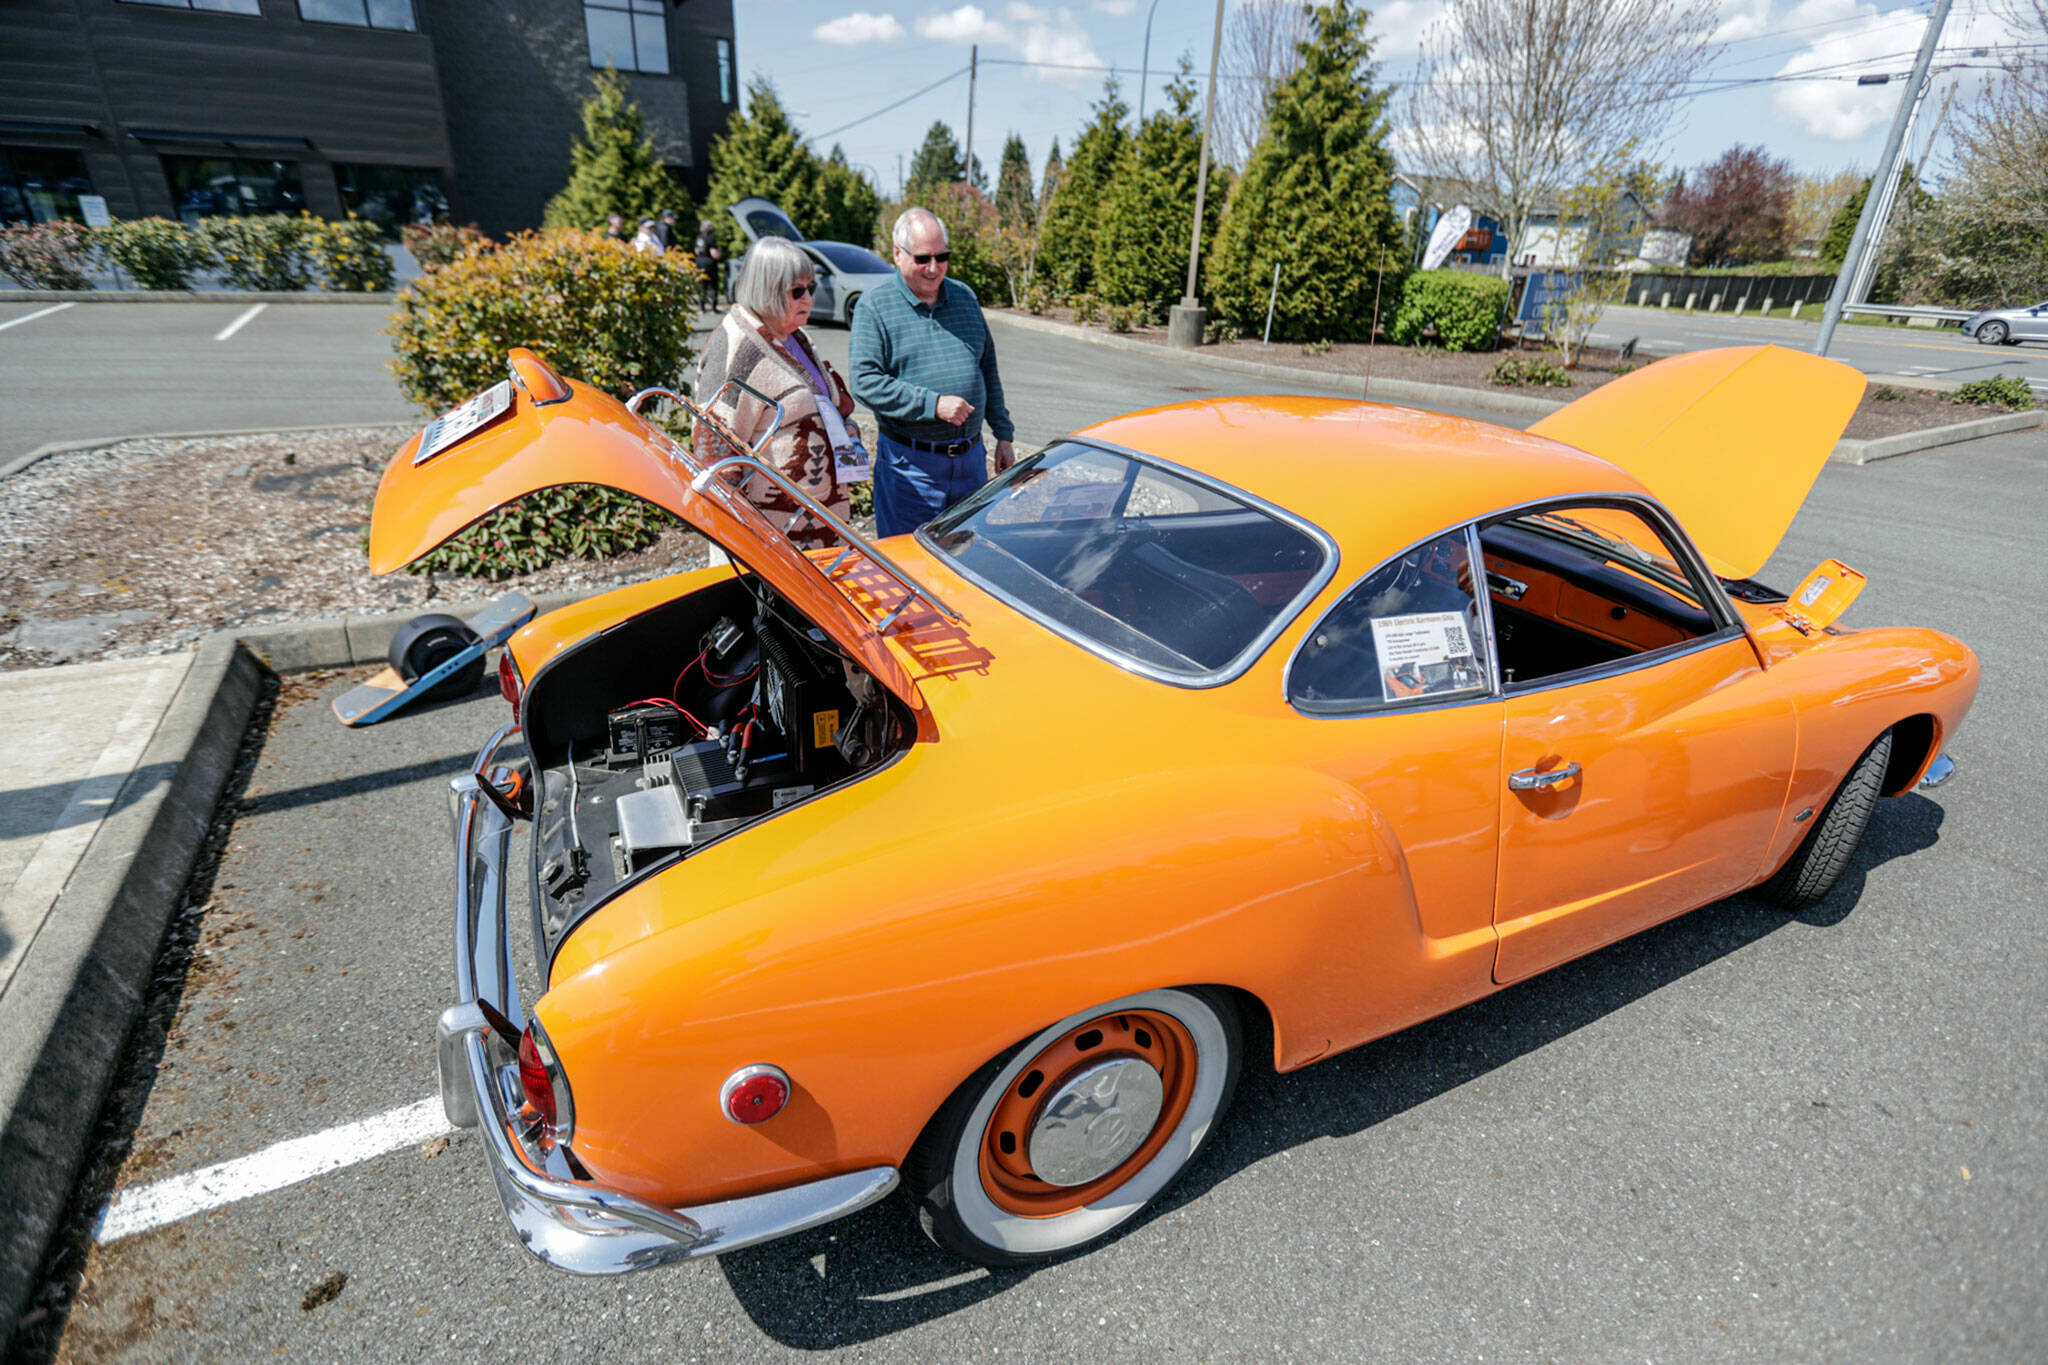 Vicki and Vic Wyant look over a 1969 Volkswagen Karmann Ghia converted from gas to electric by its owners. About 30 electric vehicles were on display at the car show in Mill Creek hosted by Snohomish County Electric Vehicle Association. (Kevin Clark / The Herald)